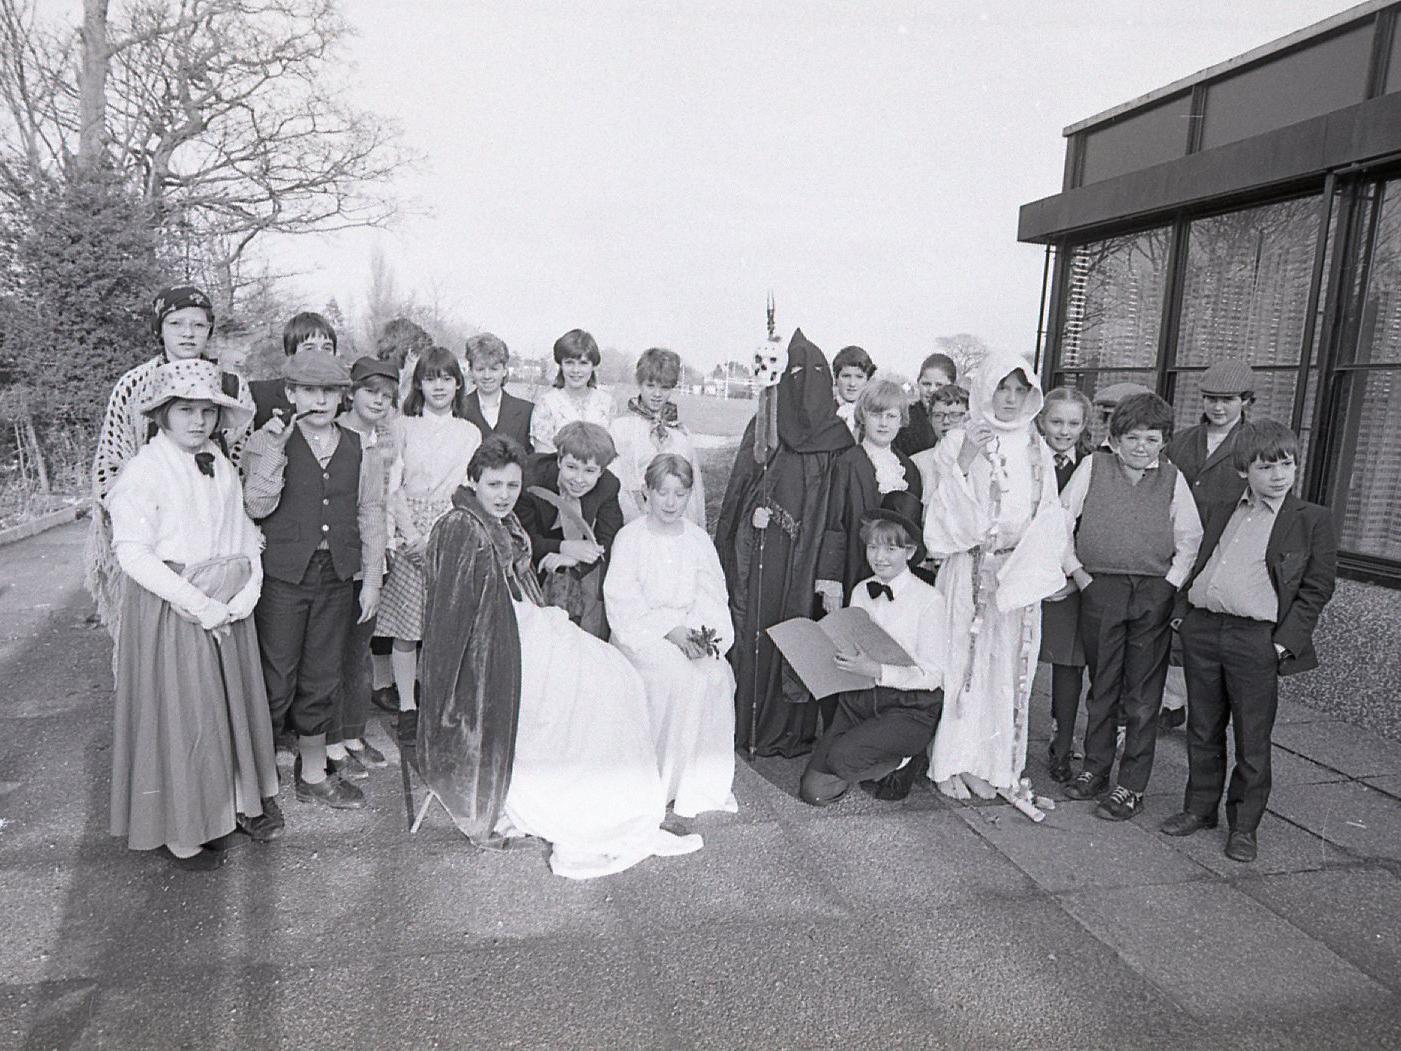 Pupils are in the throes of a late late Christmas show. More than 25 youngsters at Broughton High School, near Preston, are staging Charles Dickens' famous Christmas Carol. Pictured above is Cathy Waller (centre) as Scrooge with other pupils - from left: Susan Payne, Sarah Wignall, Nicola Seed, Vicky Park and Leanne Callaghan. Other members of the cast are gathered behind